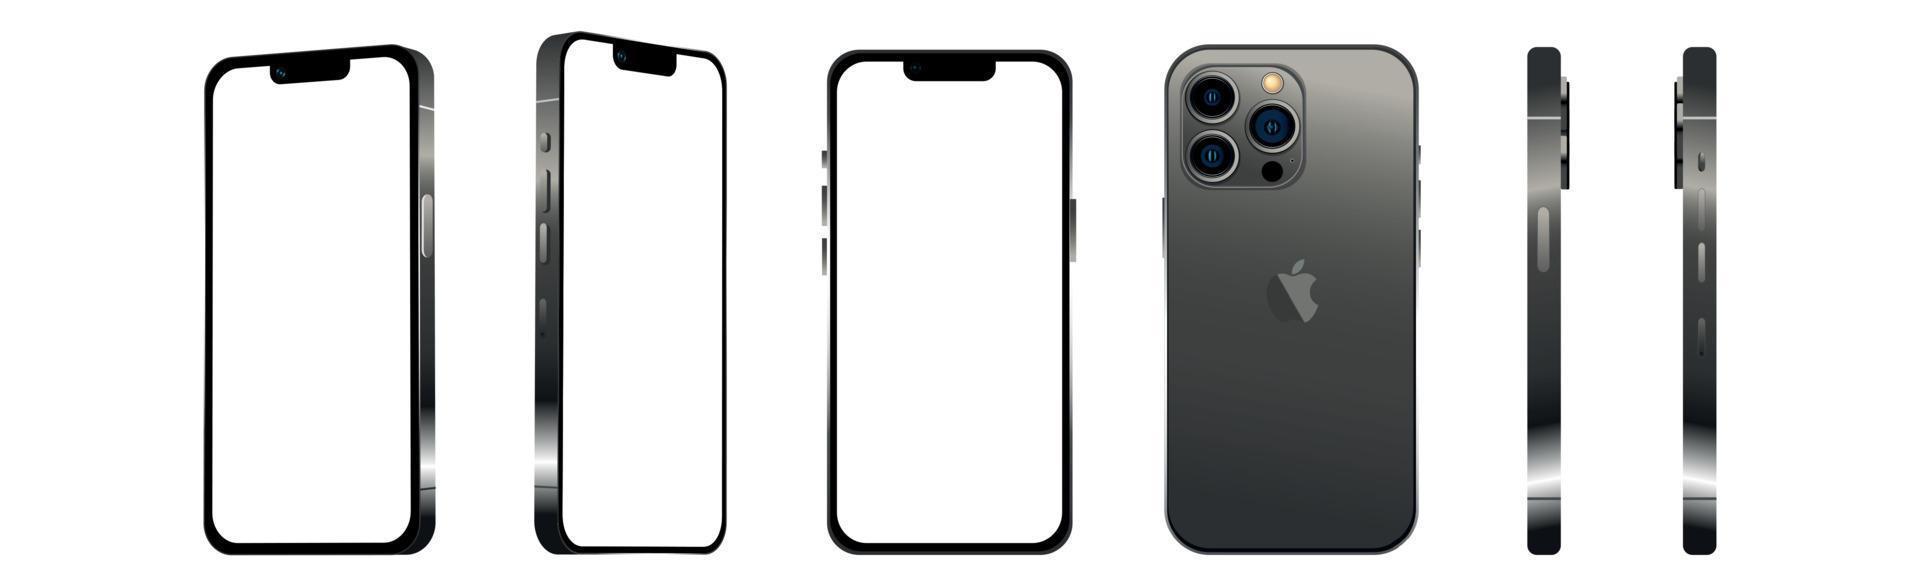 Black modern smartphone mobile iPhone 13 PRO in 6 different angles on a white background - Vector